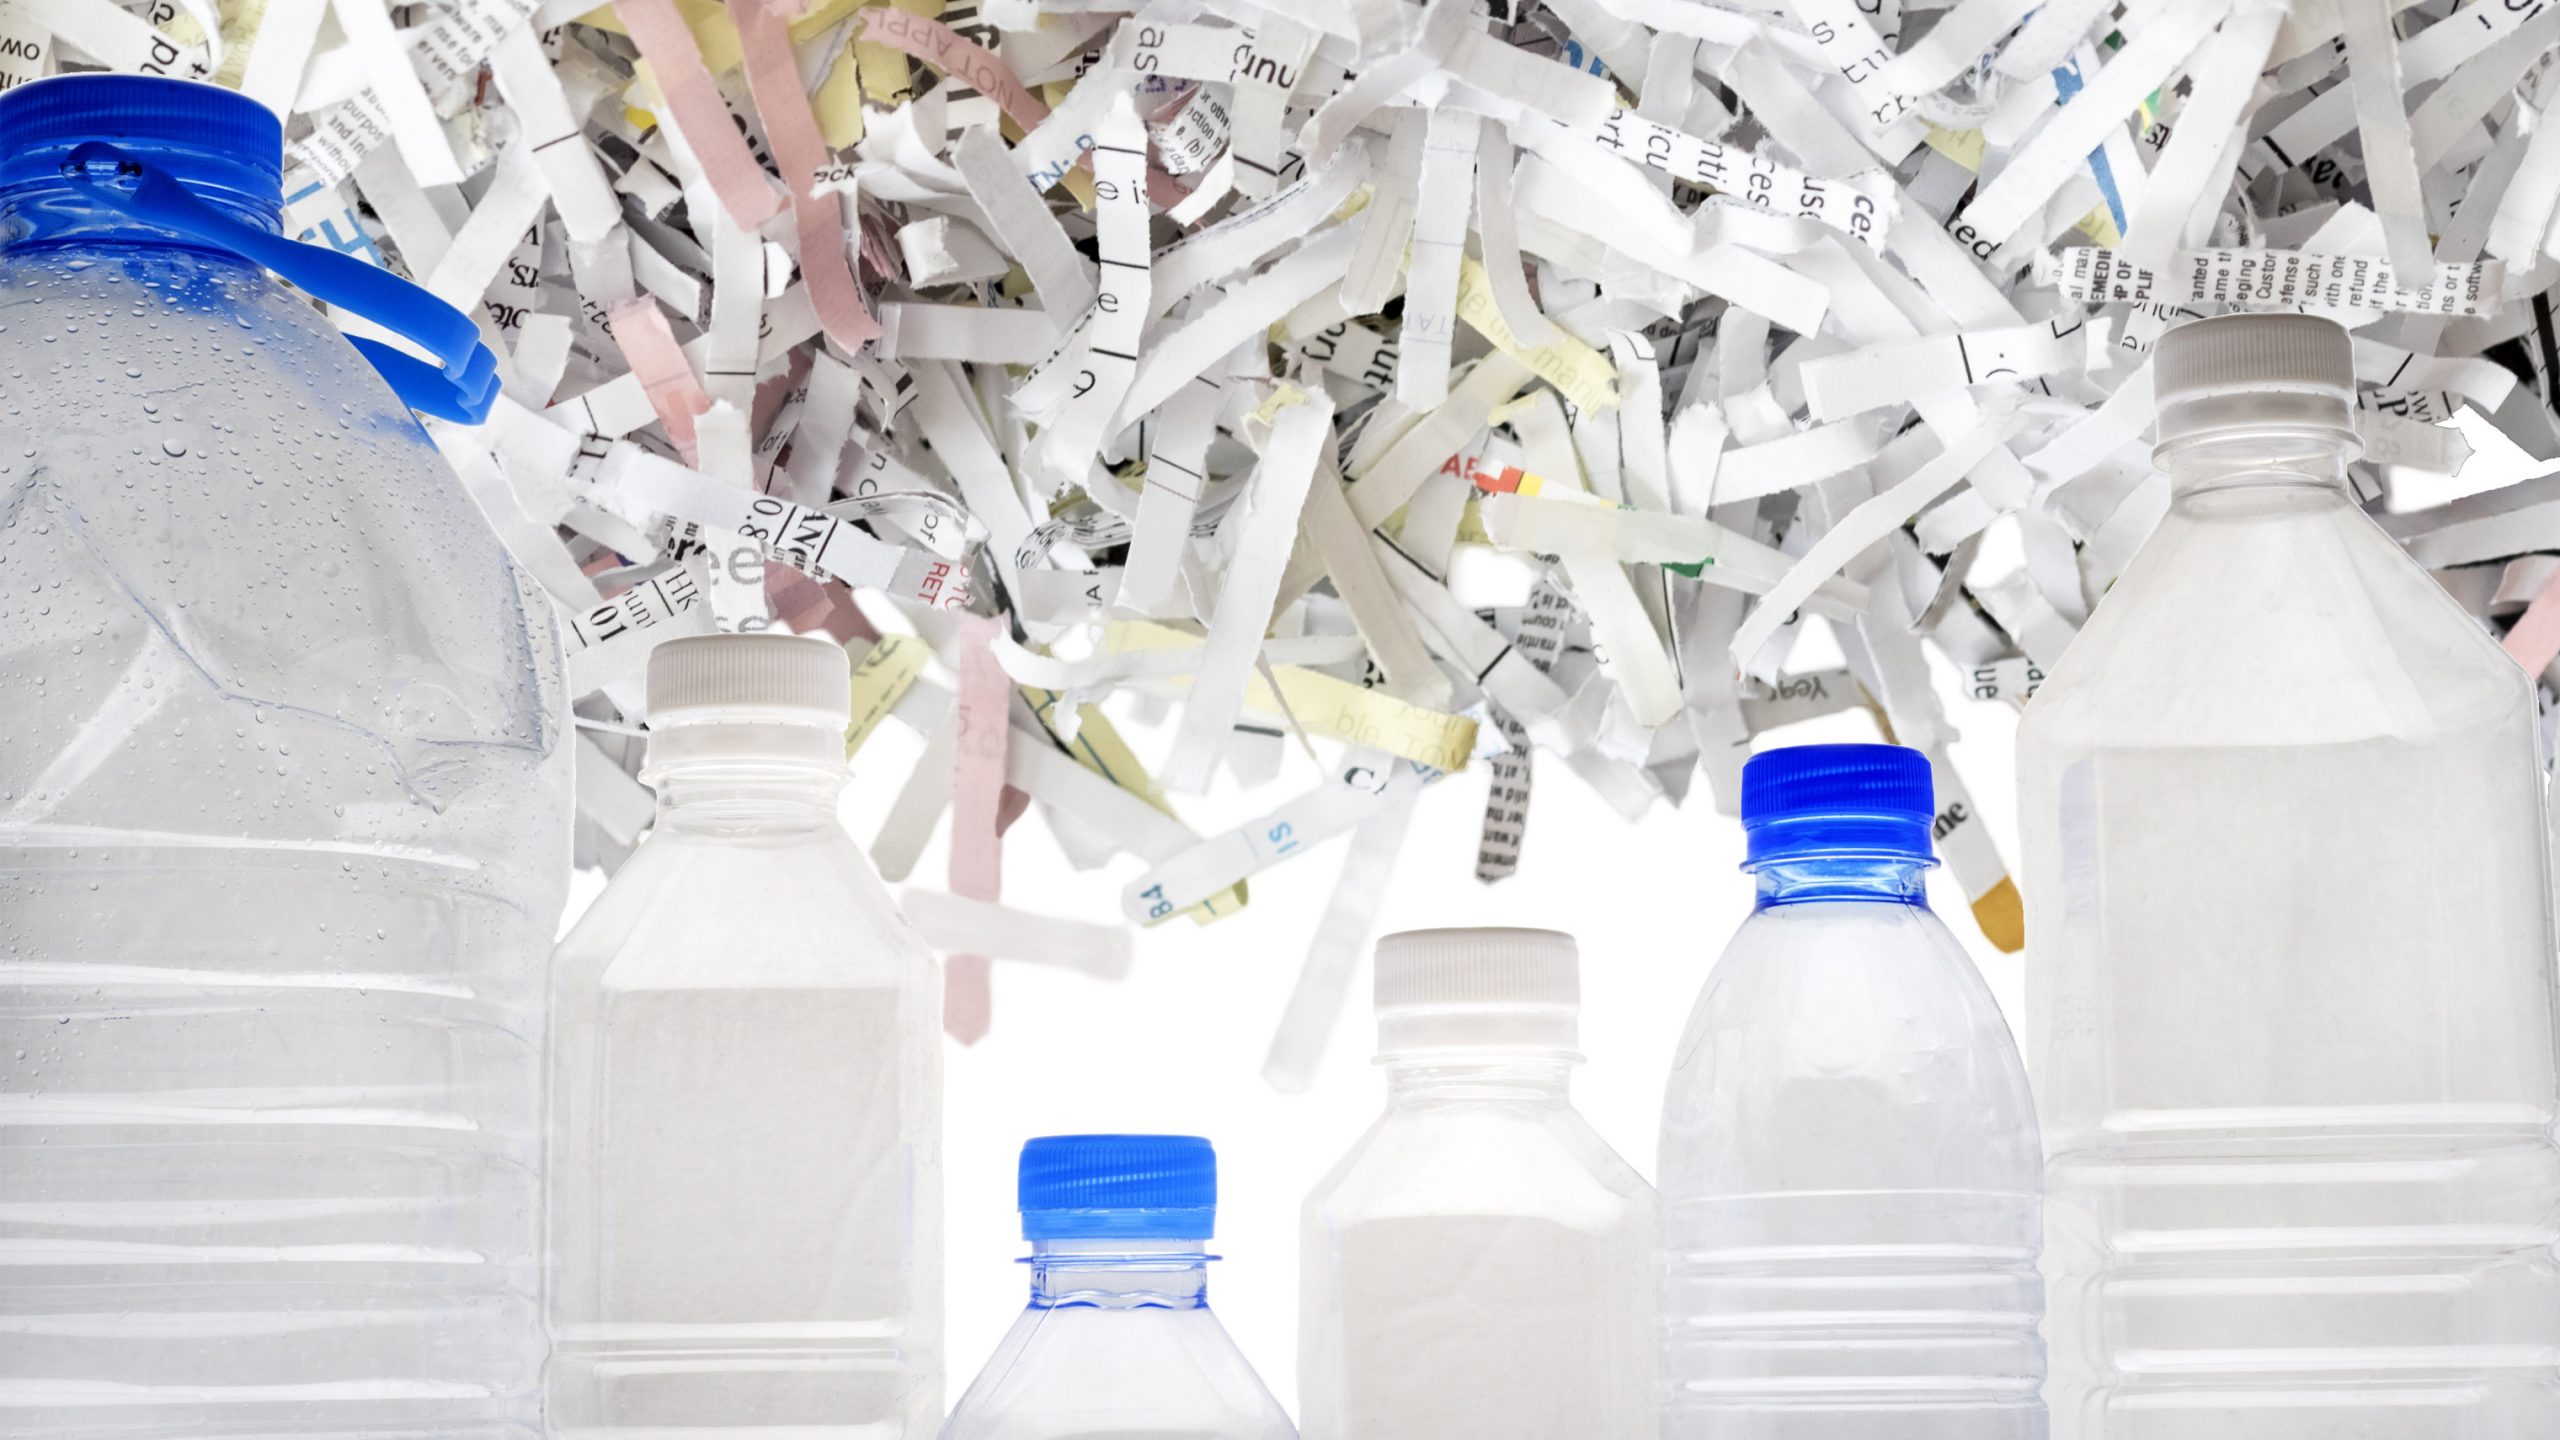 Shredded paper and water bottles for recycling